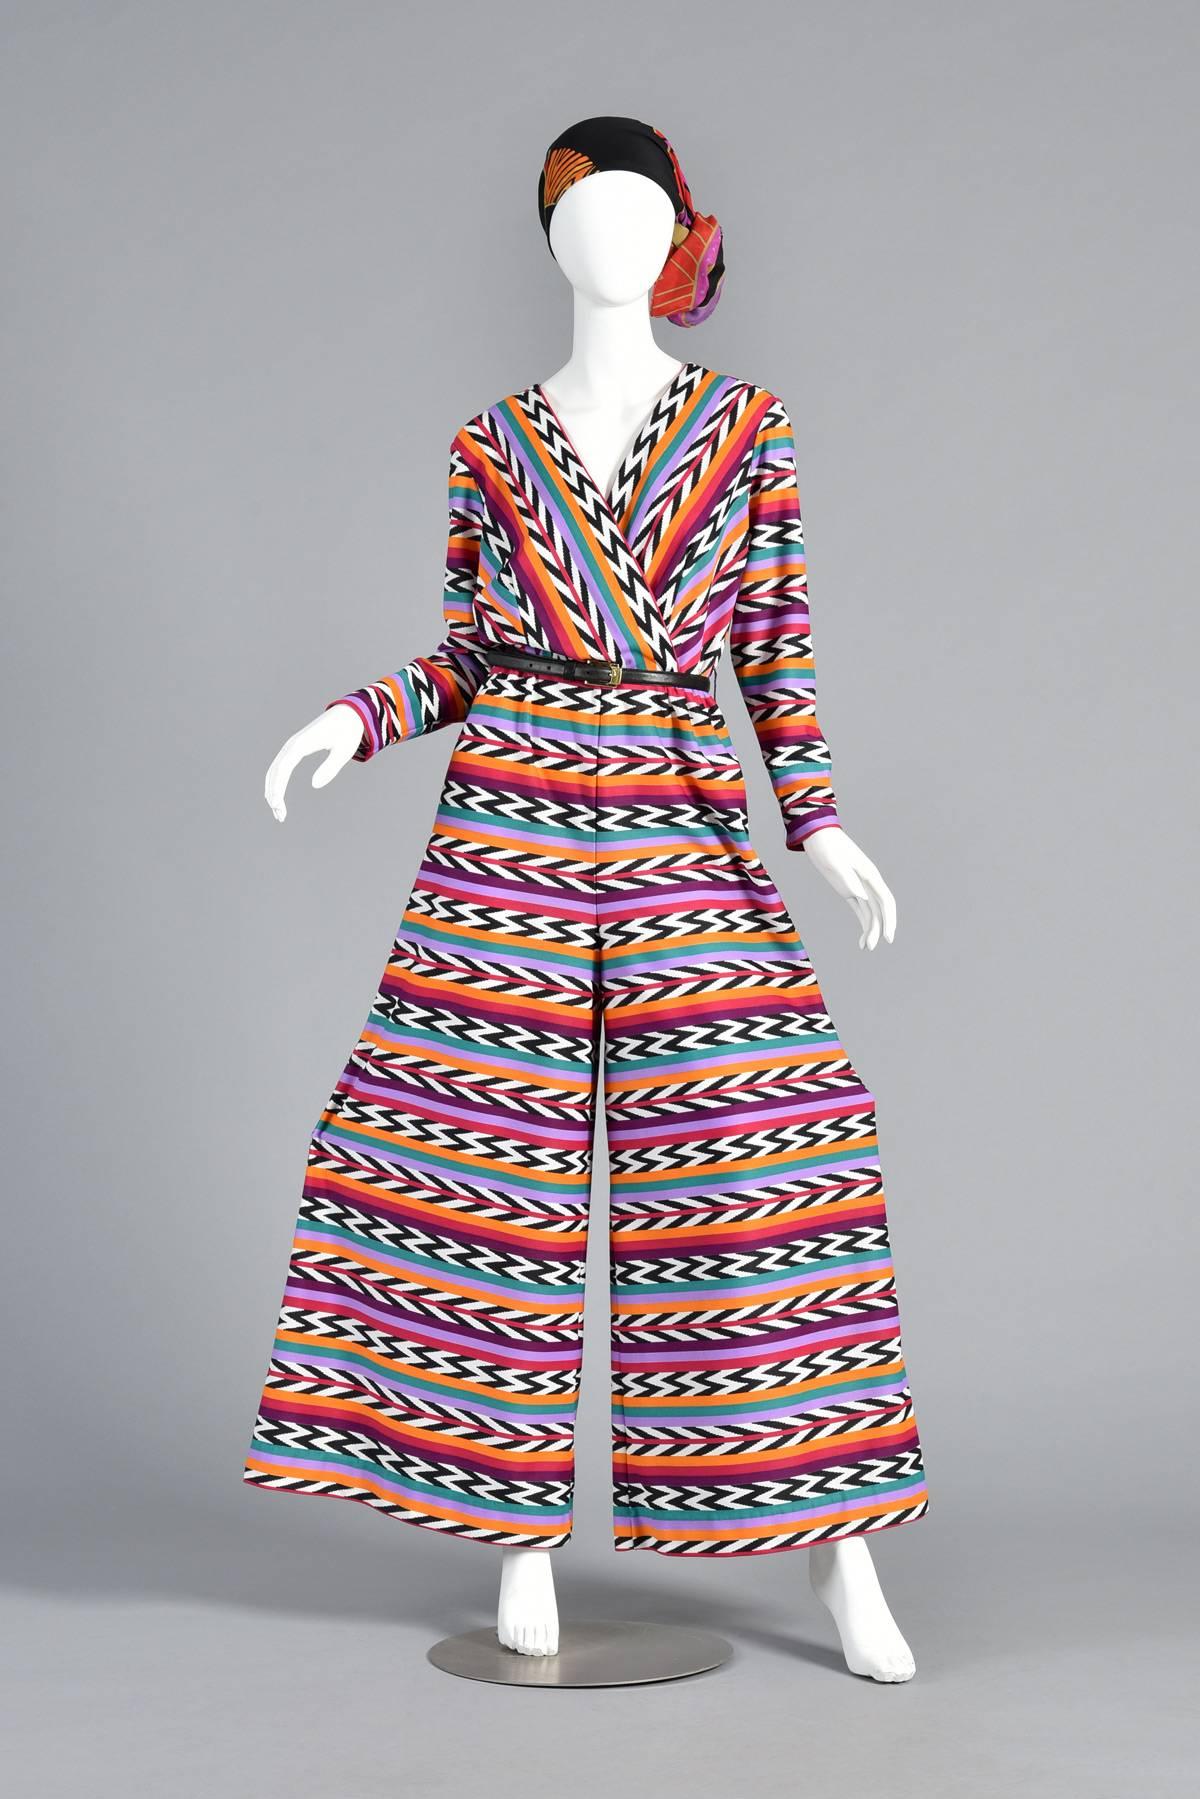 Incredible vintage 1970s graphic striped palazzo jumpsuit. Alternating rainbow stripes and b/w zig zags and chevrons in a bright Southwestern color palette. Plunging criss cross bodice. Super wide palazzo legs. Excellent vintage